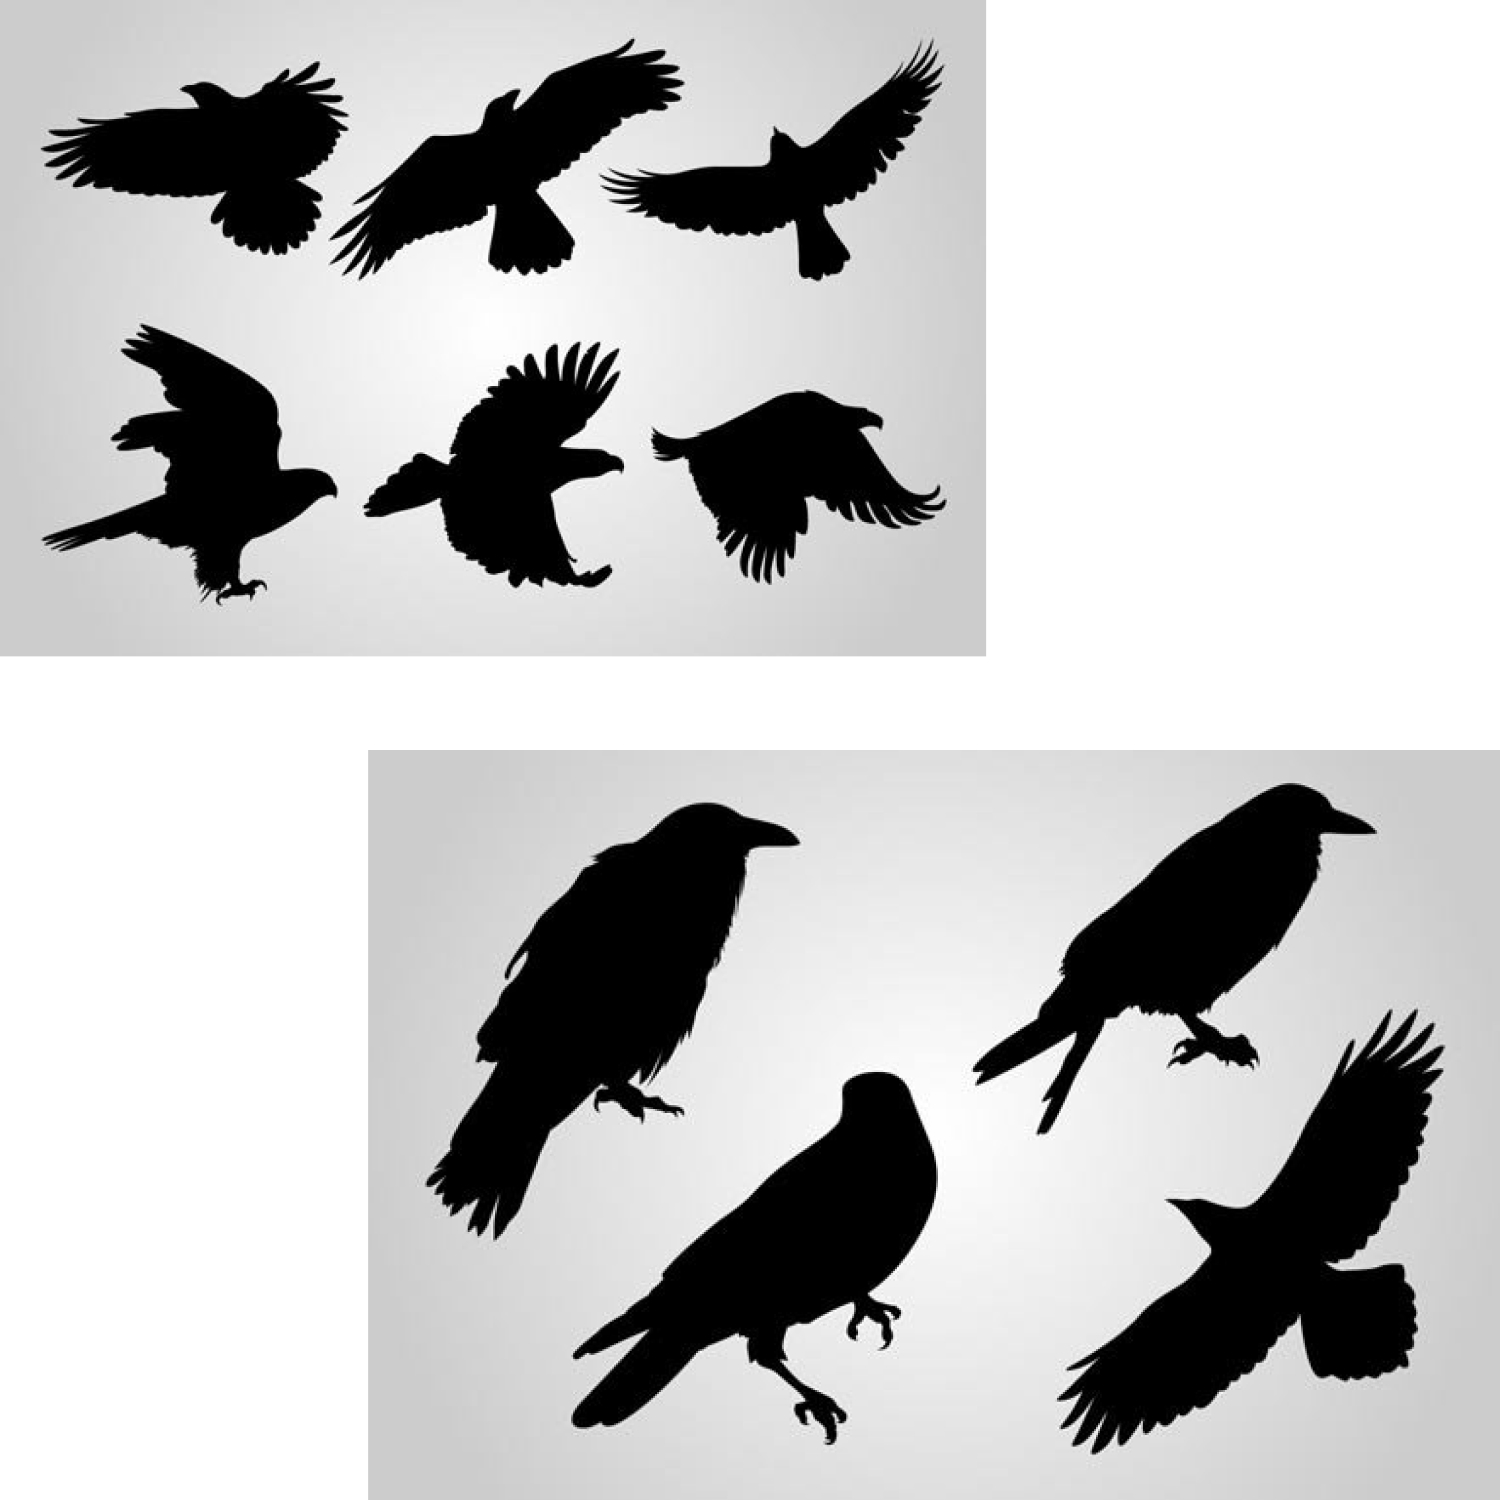 Depicted crows on a gray background.